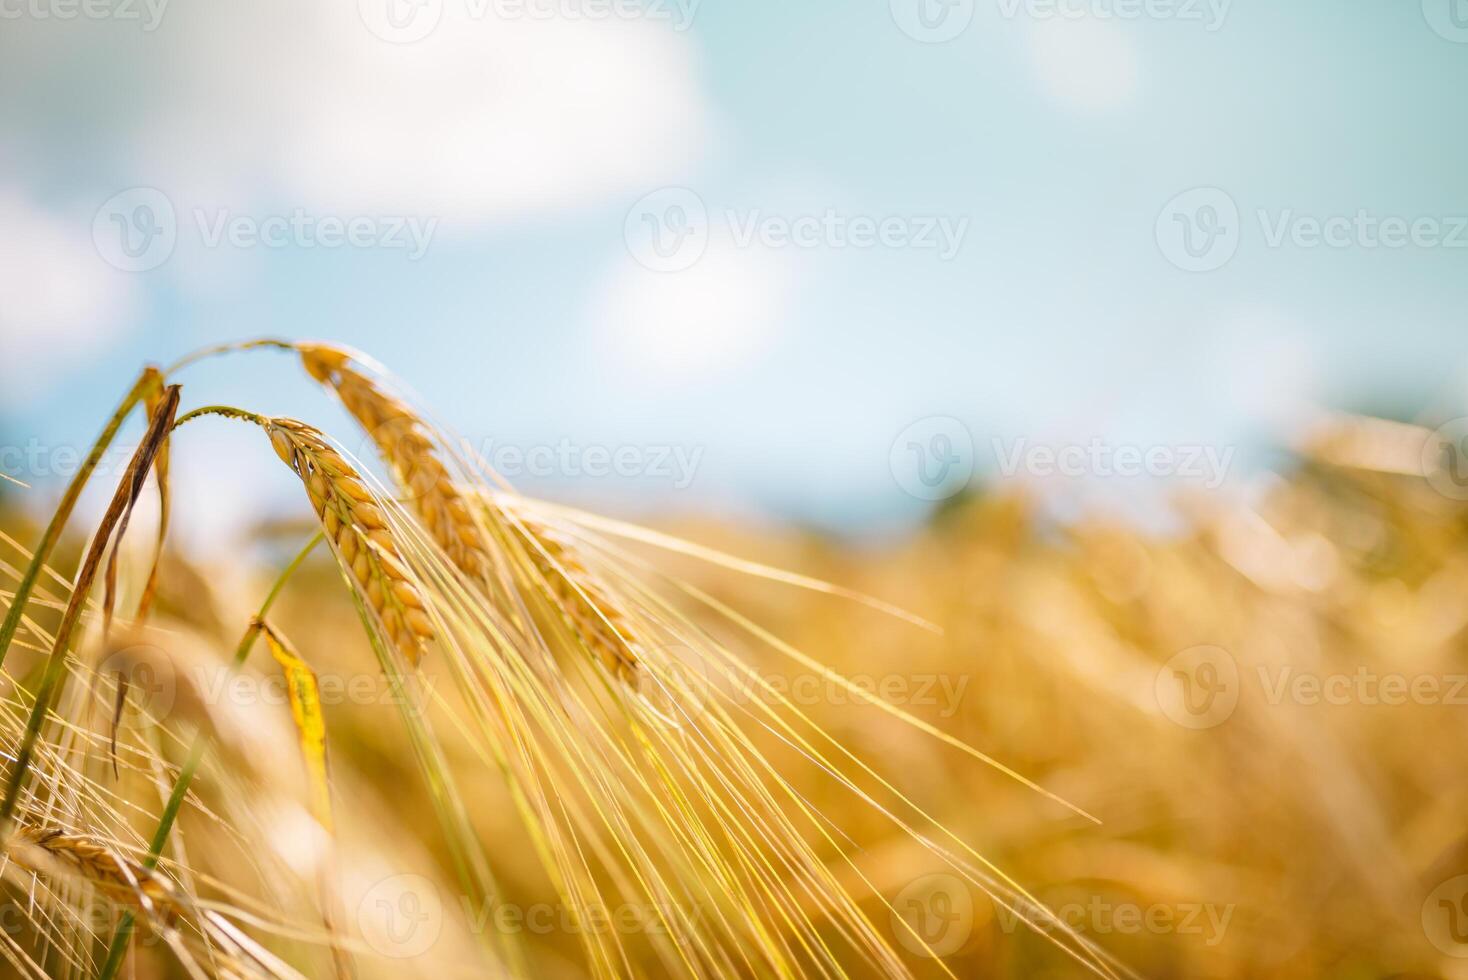 Amazing agriculture sunset landscape.Growth nature harvest. Wheat field natural product. Ears of golden wheat close up. Rural scene under sunlight. Summer background of ripening ears of landscape photo